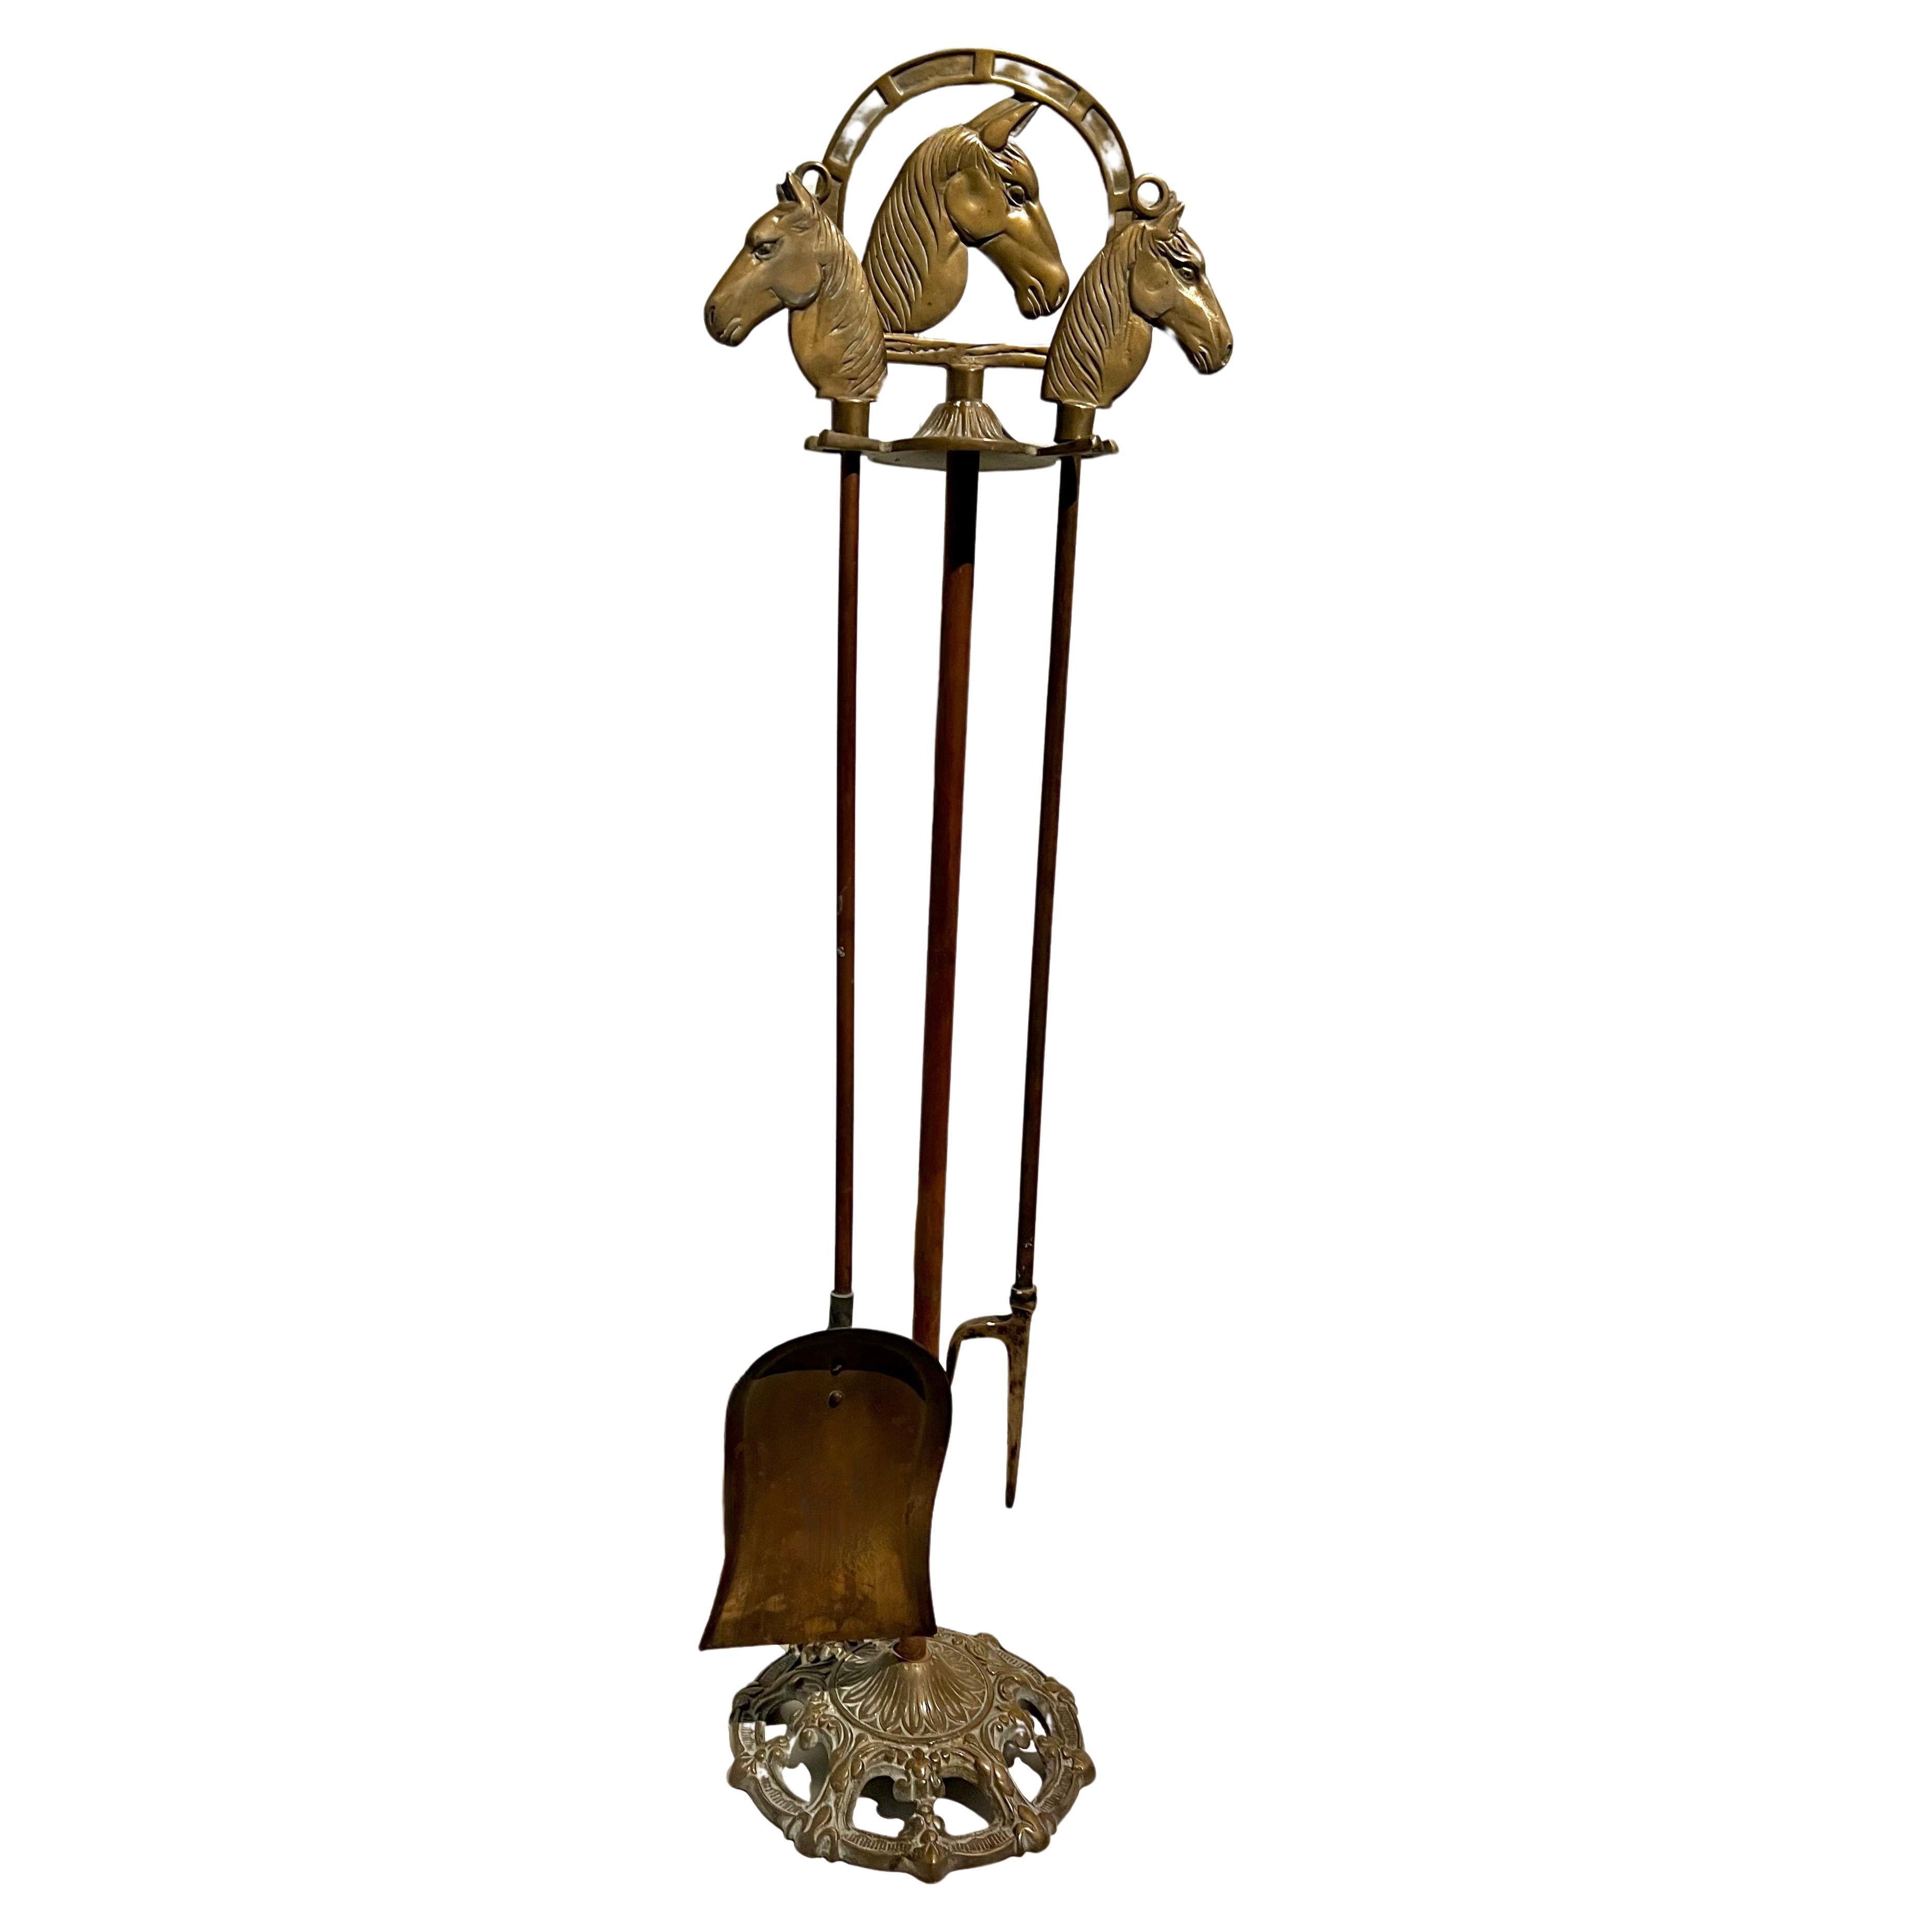 Solid Brass Fireplace Tools with Horse Head Handles and Stand